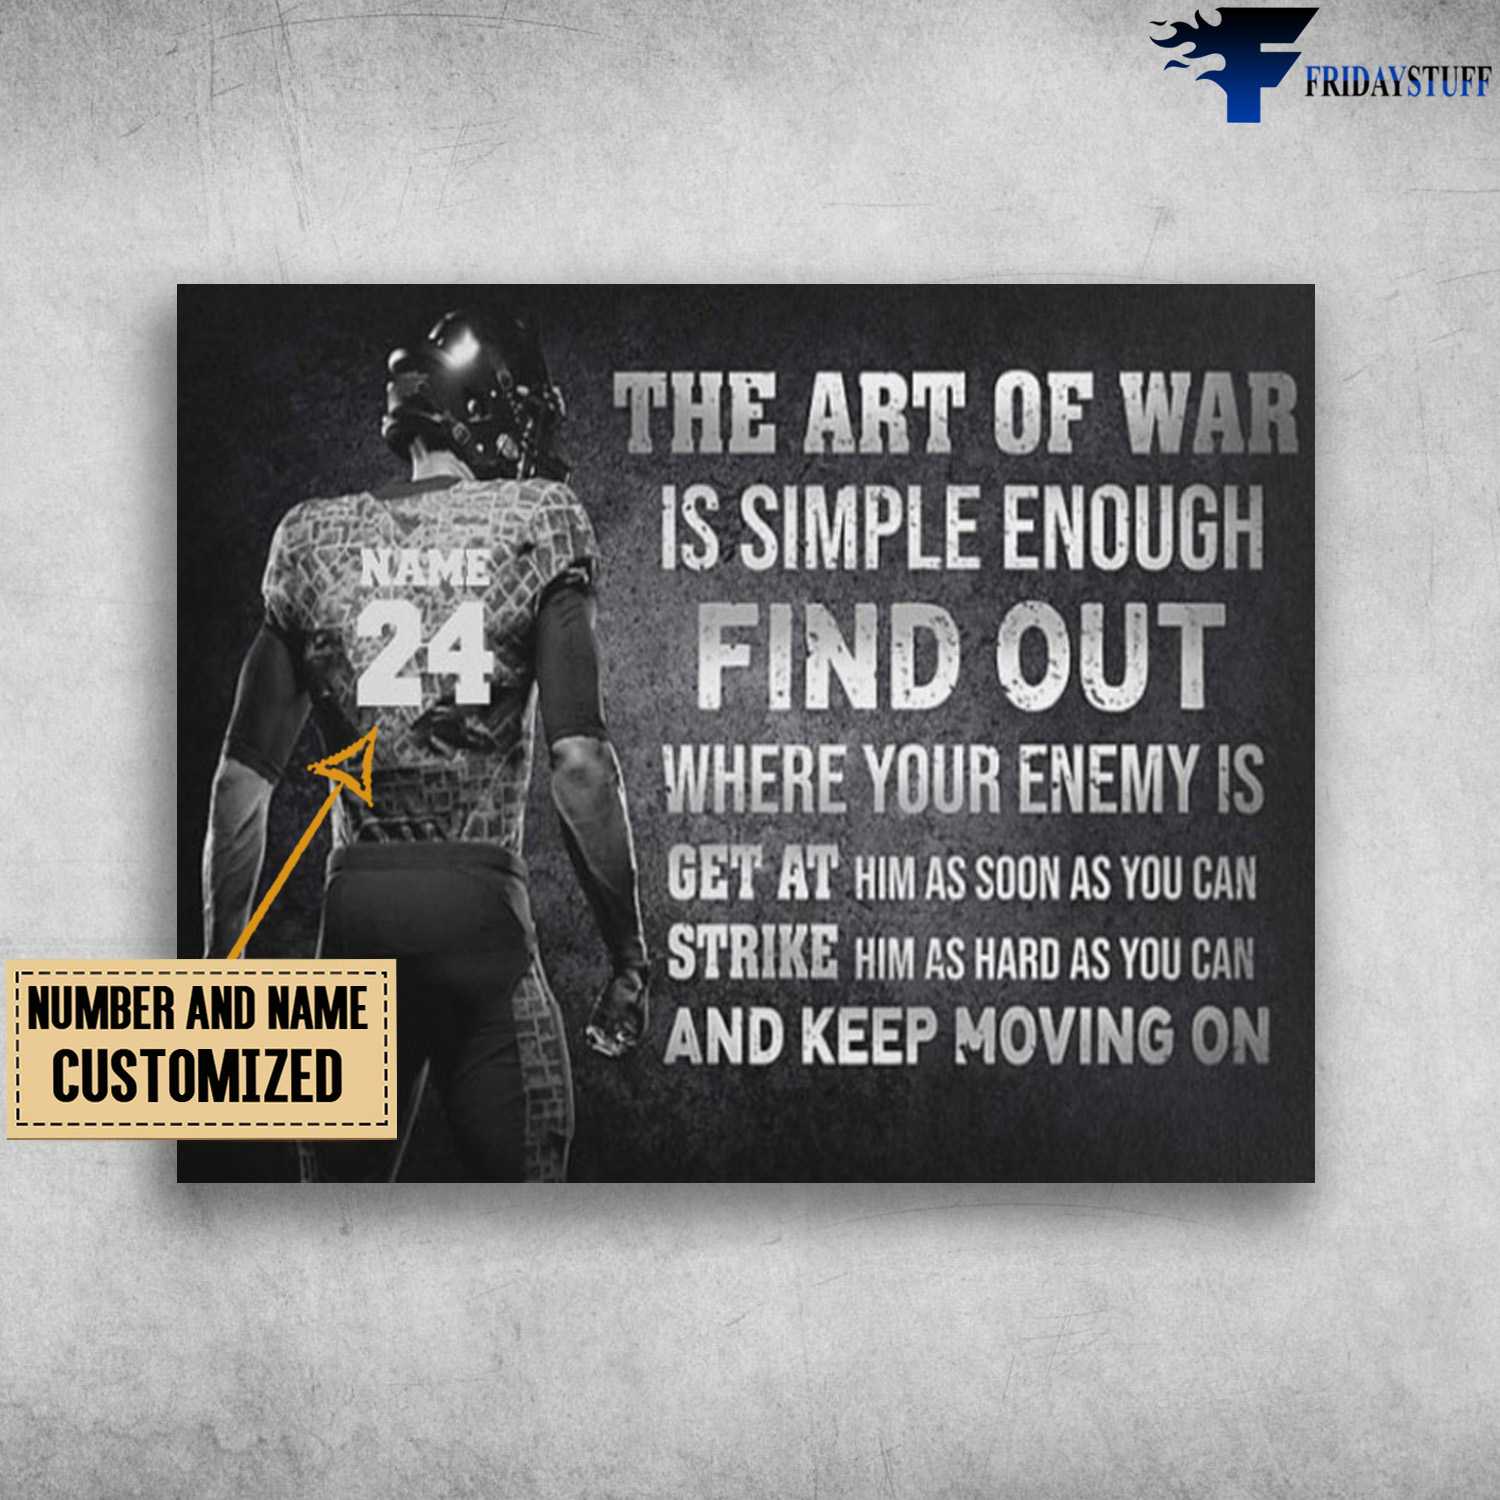 Football Man, Football Poster, The Art Of War, Is Simple Enough Find Out, Where Your Enemy Is, Get At Him As Soon As You Can, Strike Him As Hard You Can, And Keep Moving On